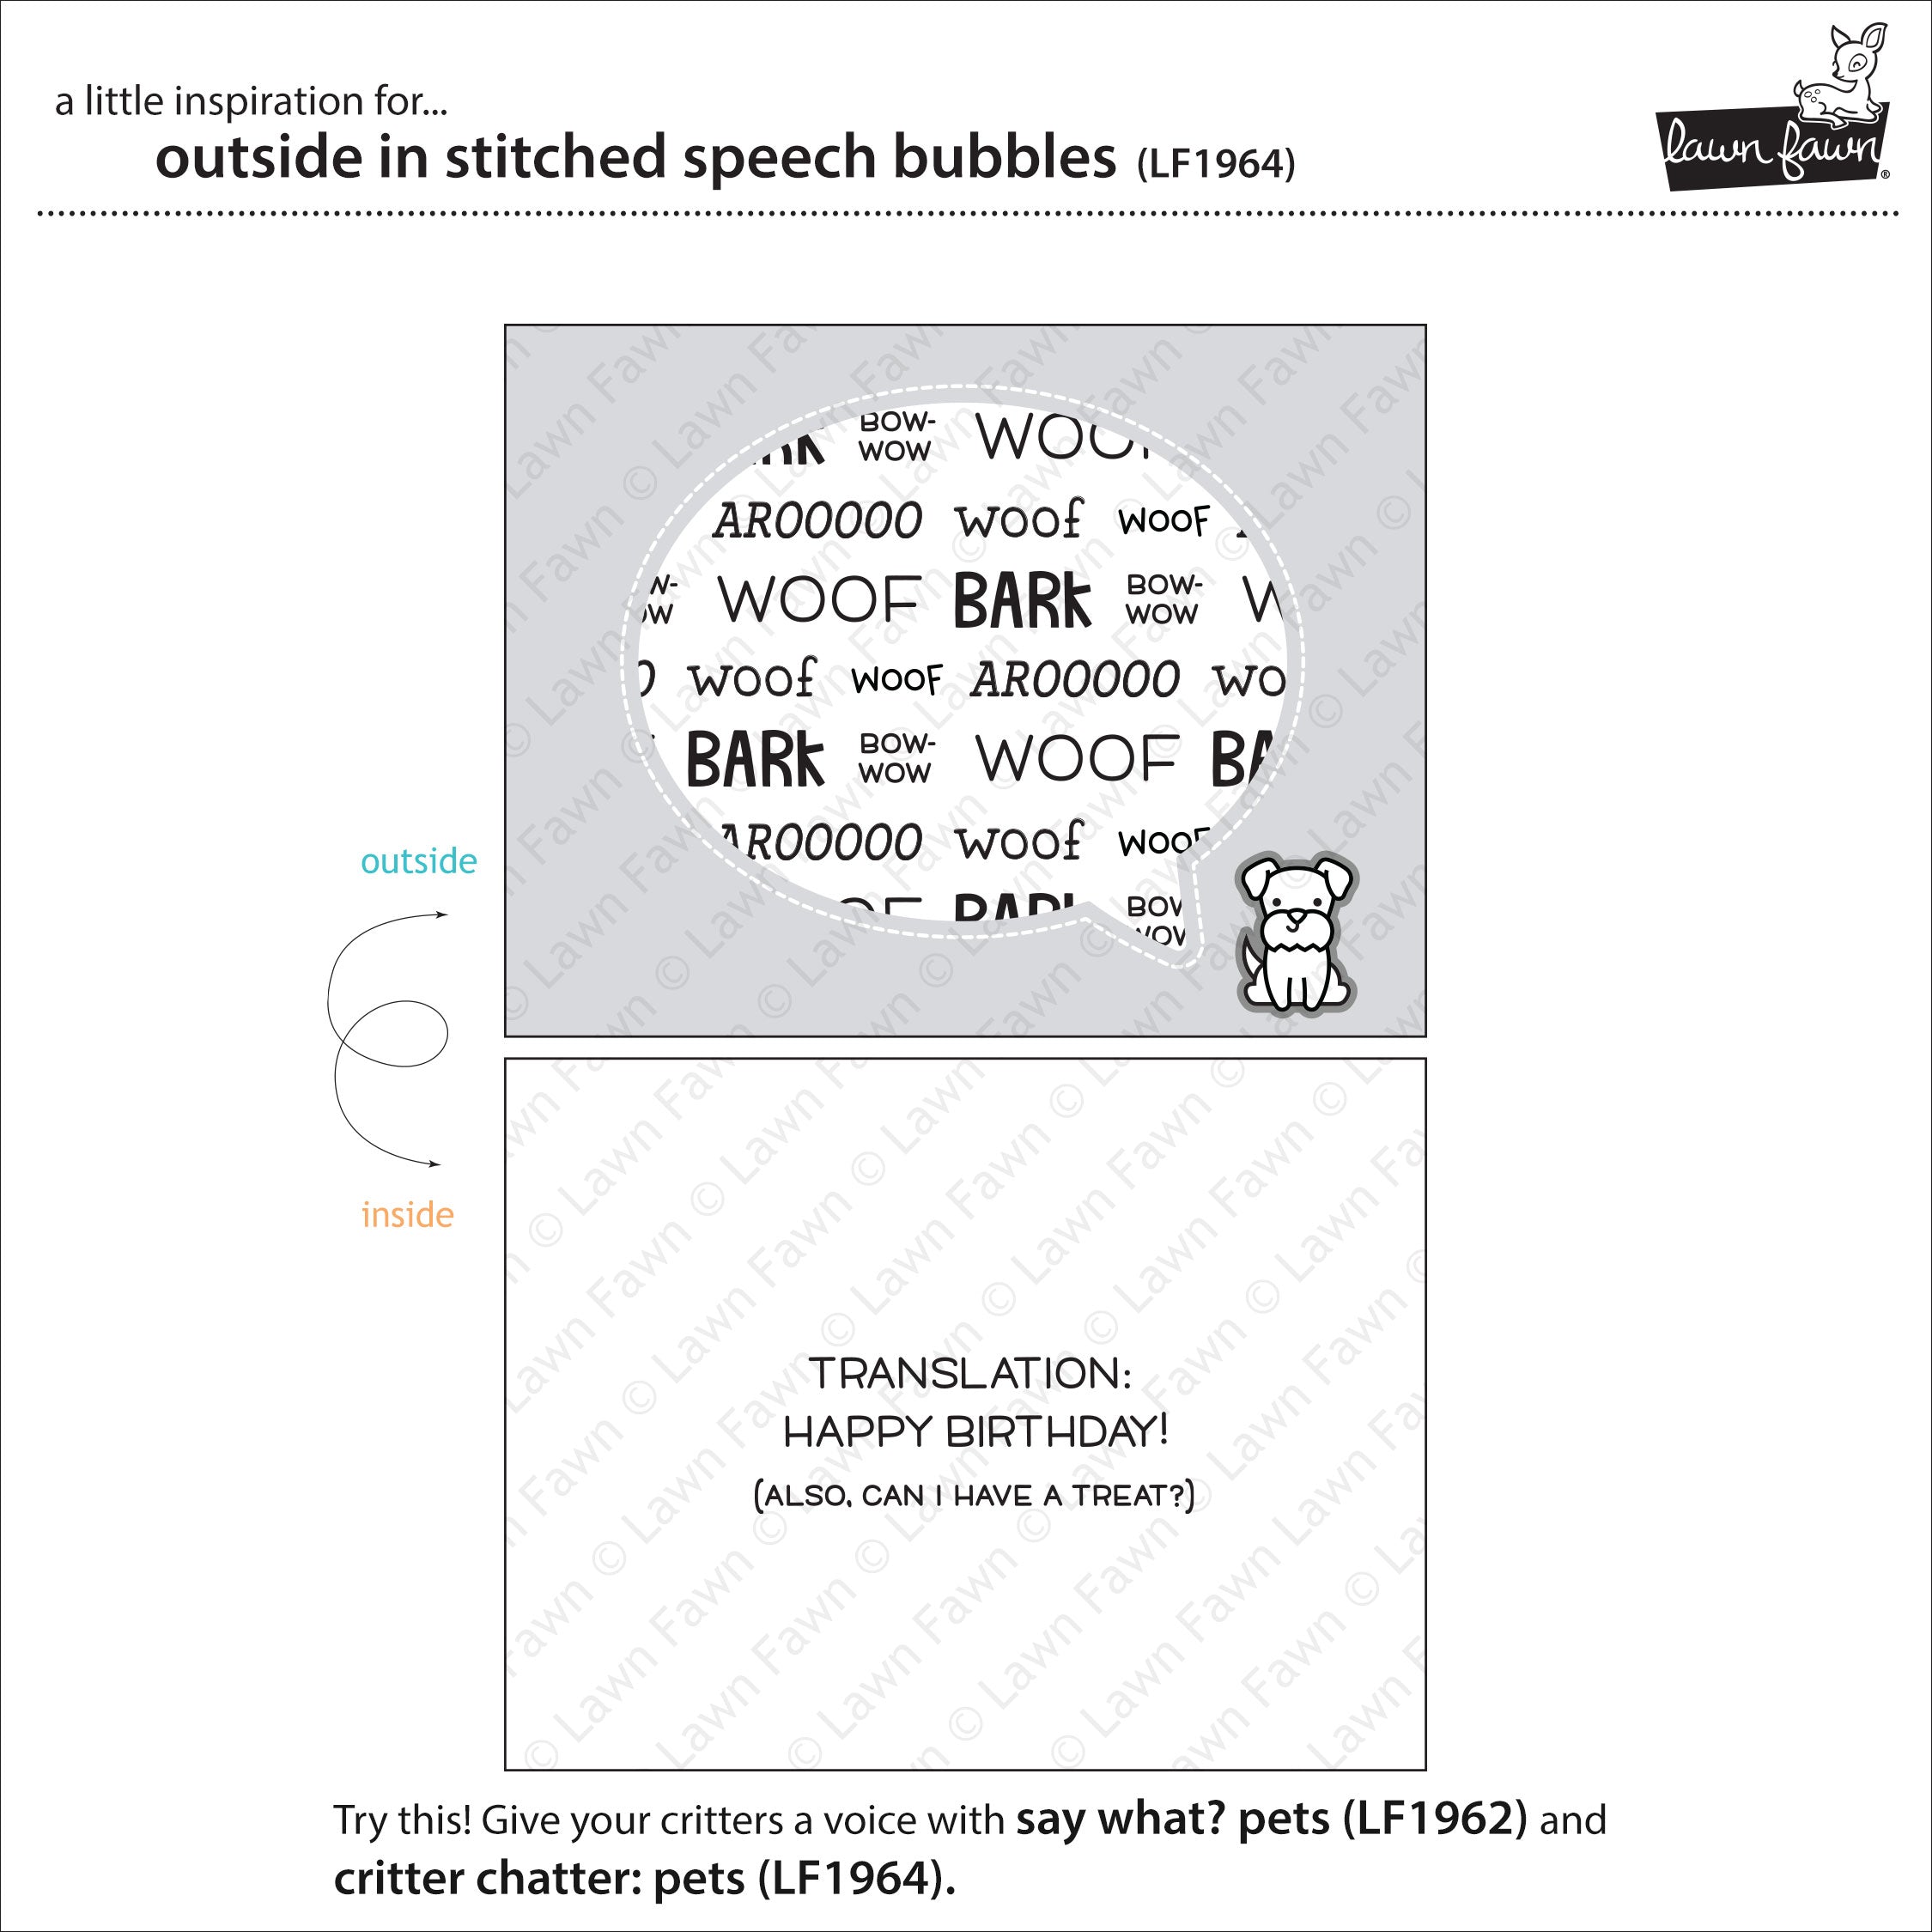 outside in stitched speech bubbles